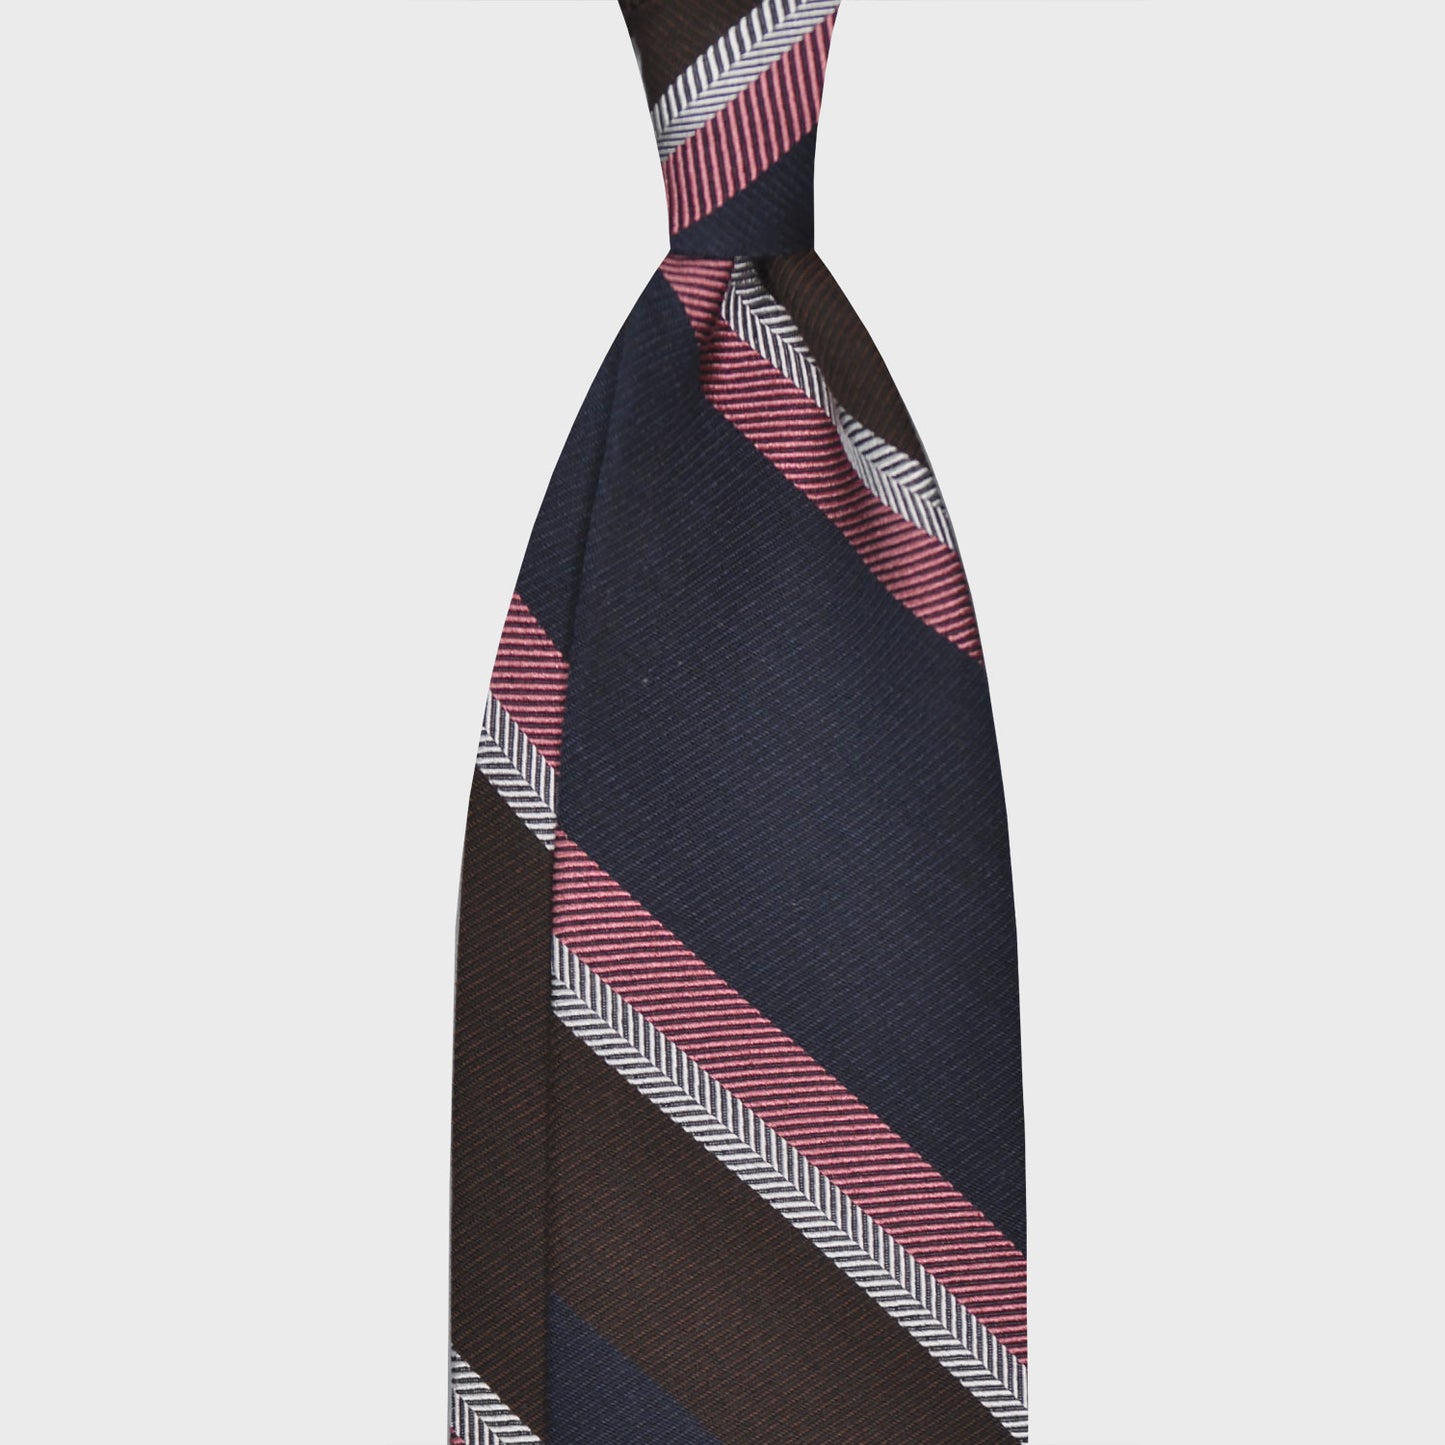 Coffee Brown Silk Wool Striped Tie. Elegant regimental necktie made with silk and wool, hand rolled edge, unlined 3 folds, coffee brown and navy blue blocks with pink and silver striped, F.Marino Napoli ties exclusive for Wools Boutique Uomo